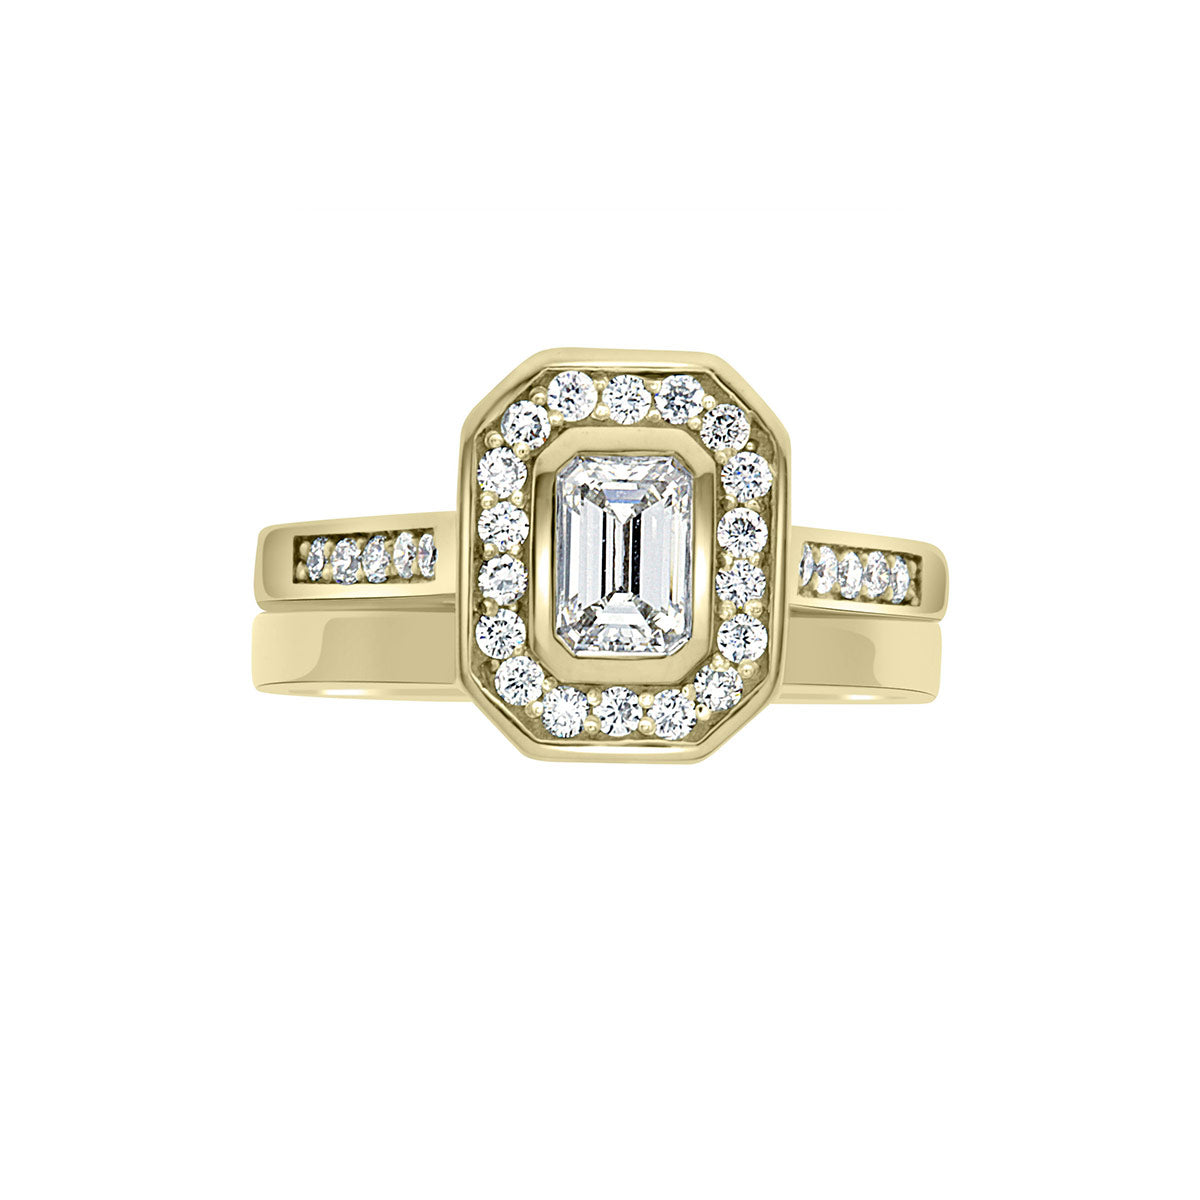 Emerald Cut Halo Ring in yellow gold with a matching plain wedding ring